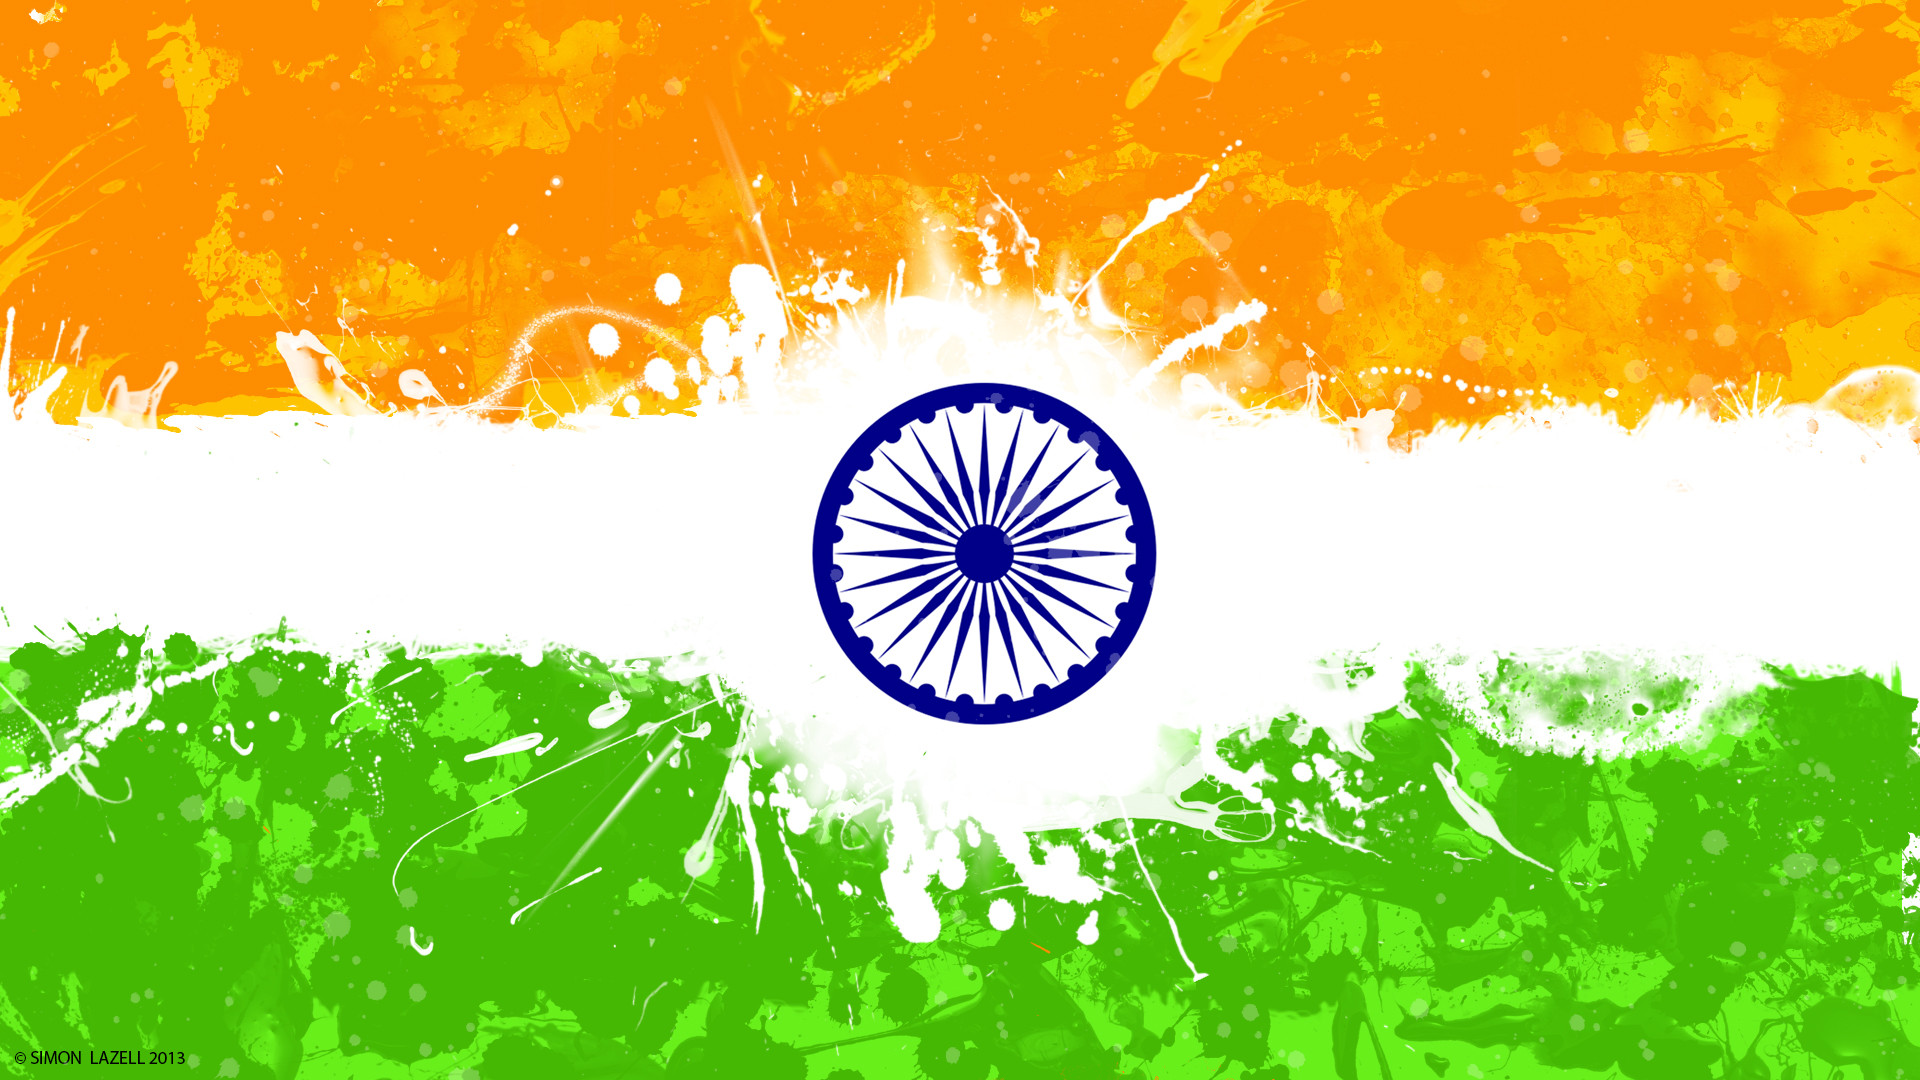  day hd wallpapers images free download indian flag wallpapers hd